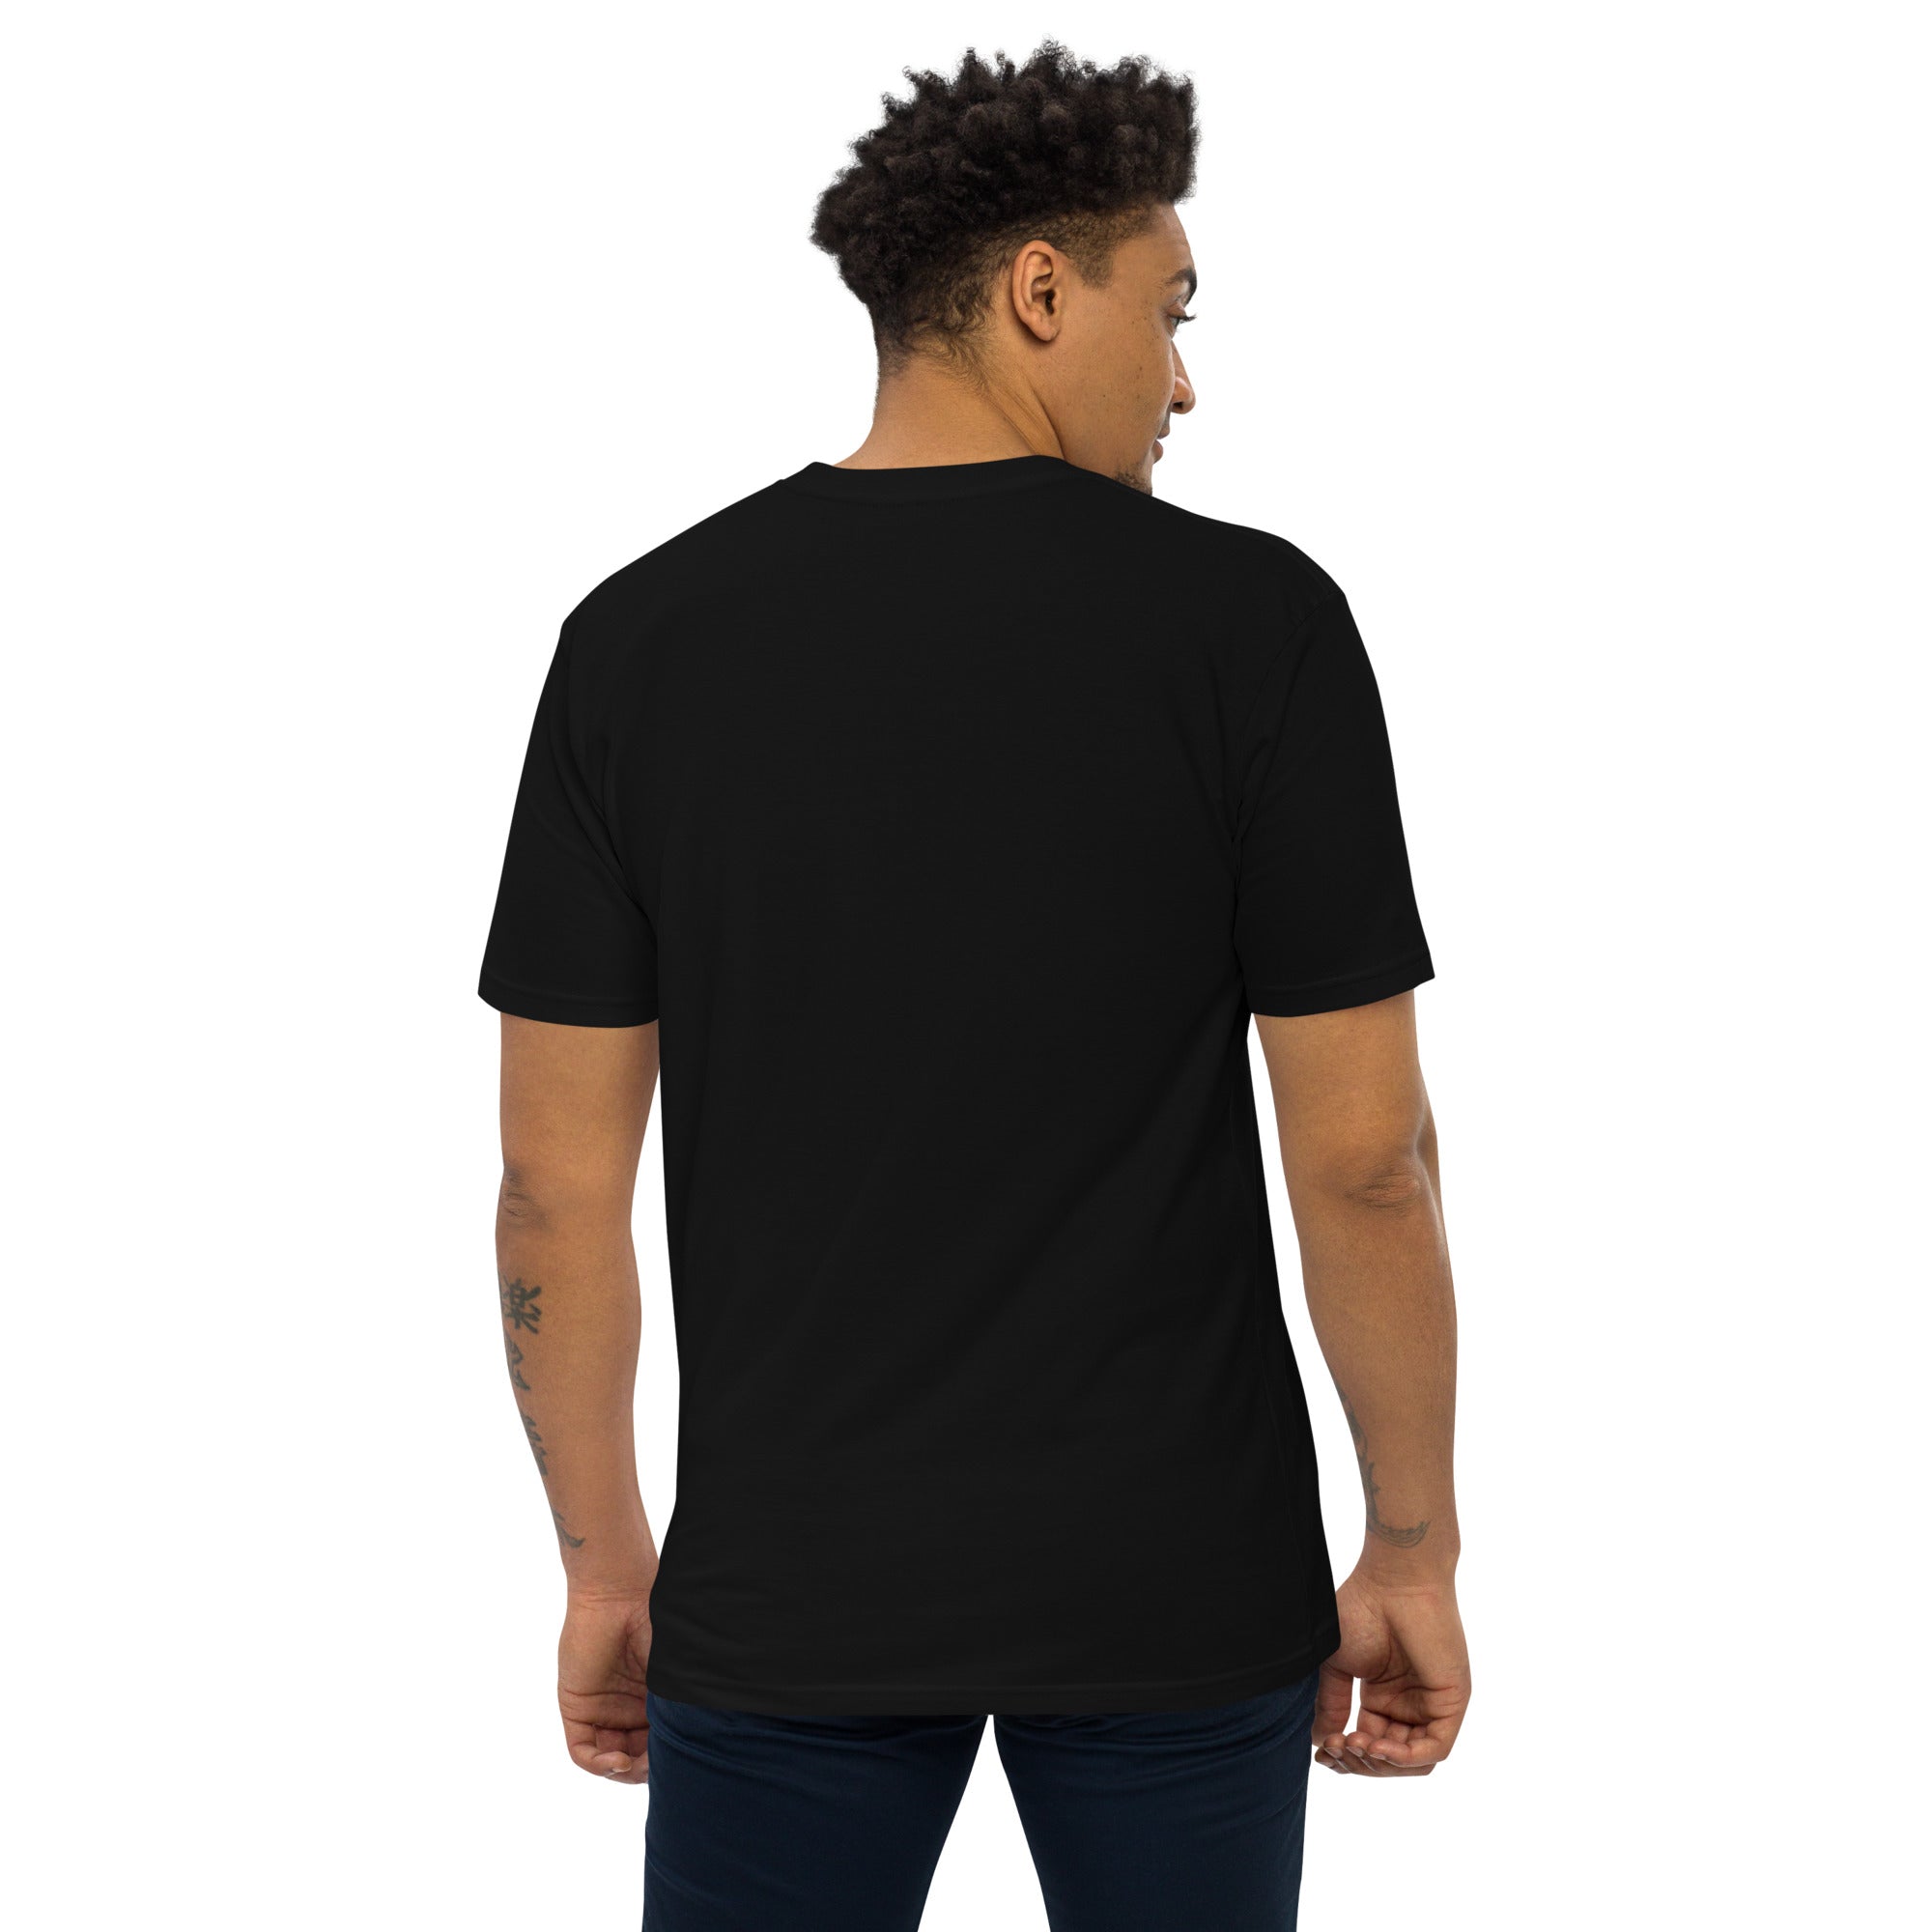 Men’s Heavyweight Tee - Tom Style Embroidered